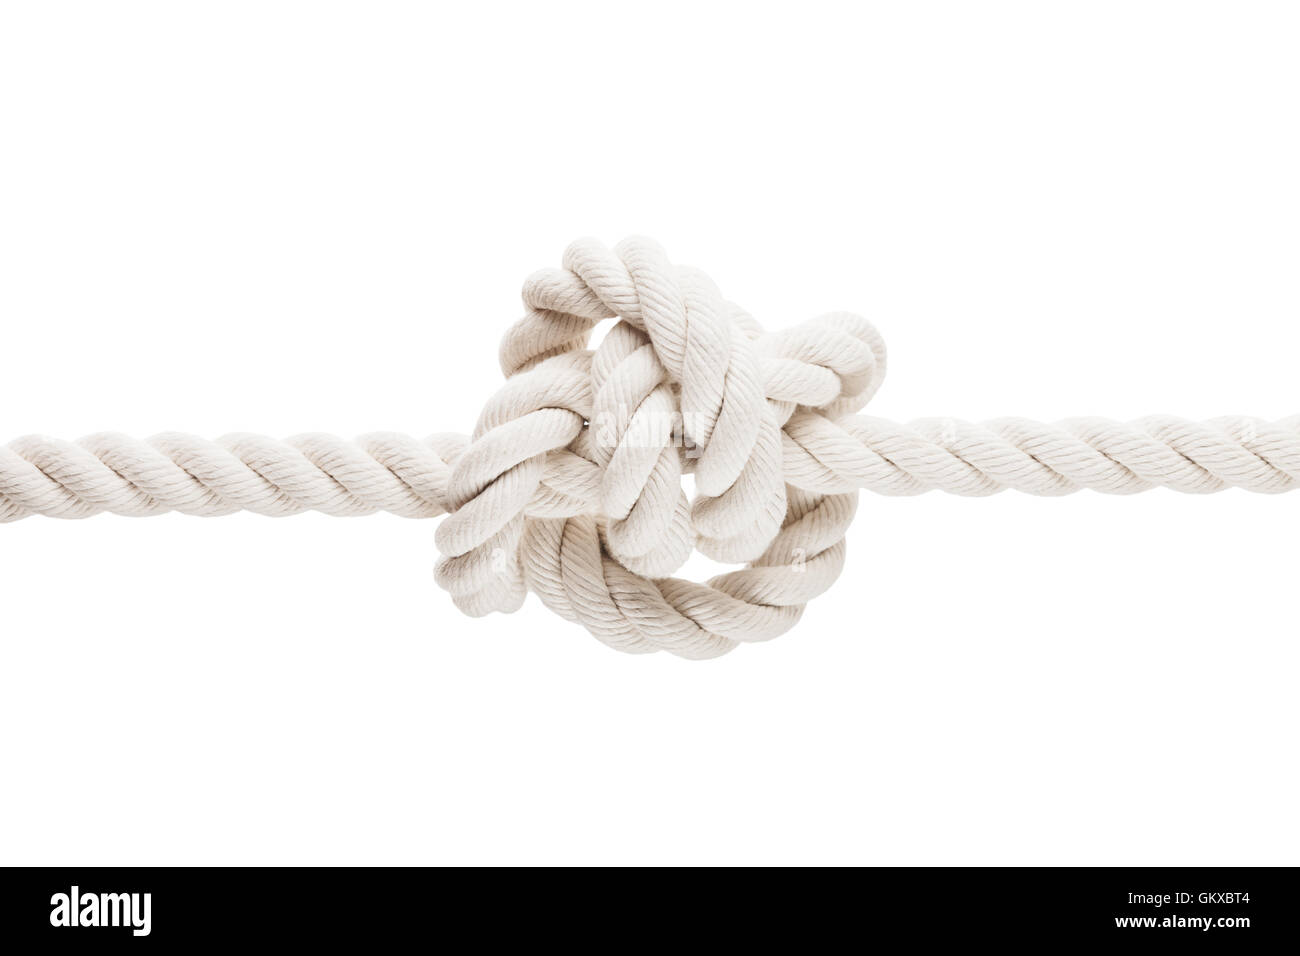 Tied knot on rope or spring Stock Photo